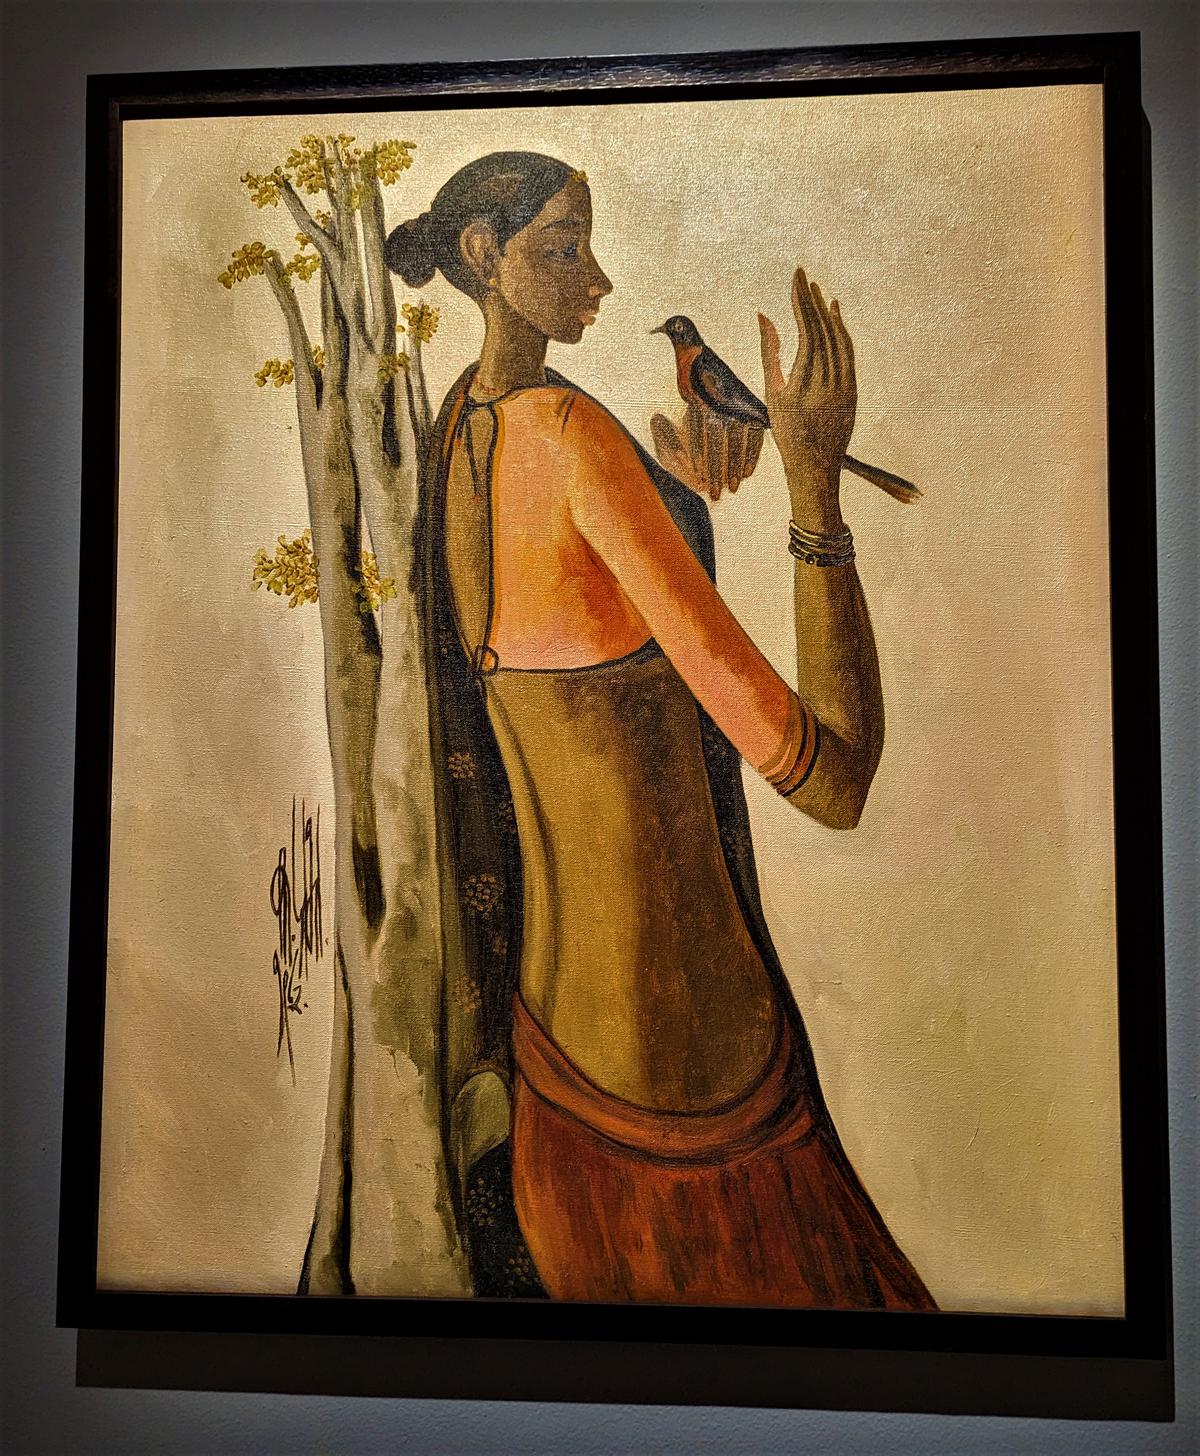 Oil on canvas titled ‘Girl with a bird’ by artist B. Prabha from 1962.